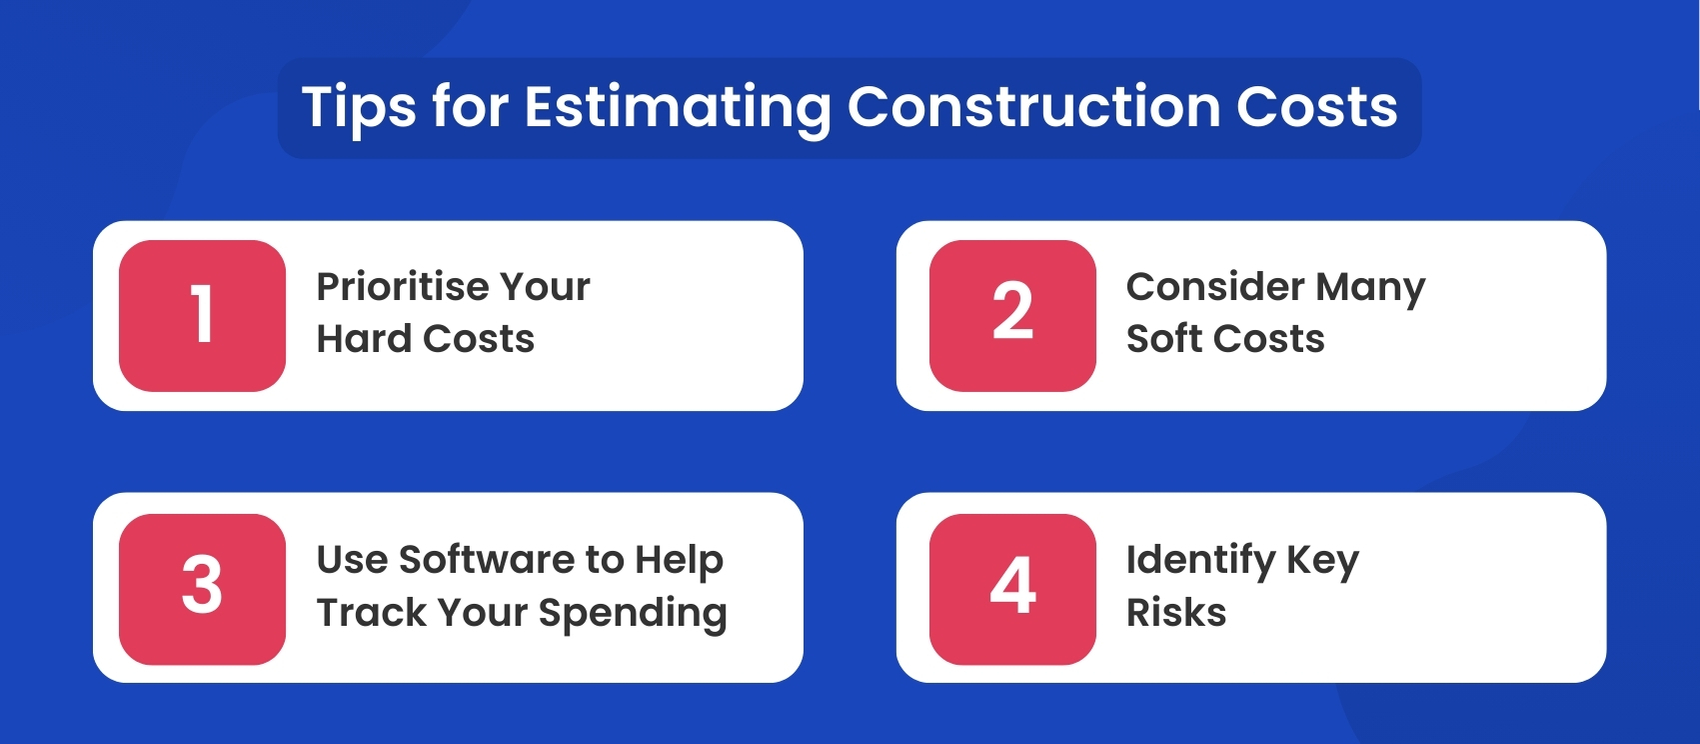 Tips for estimating construction costs 